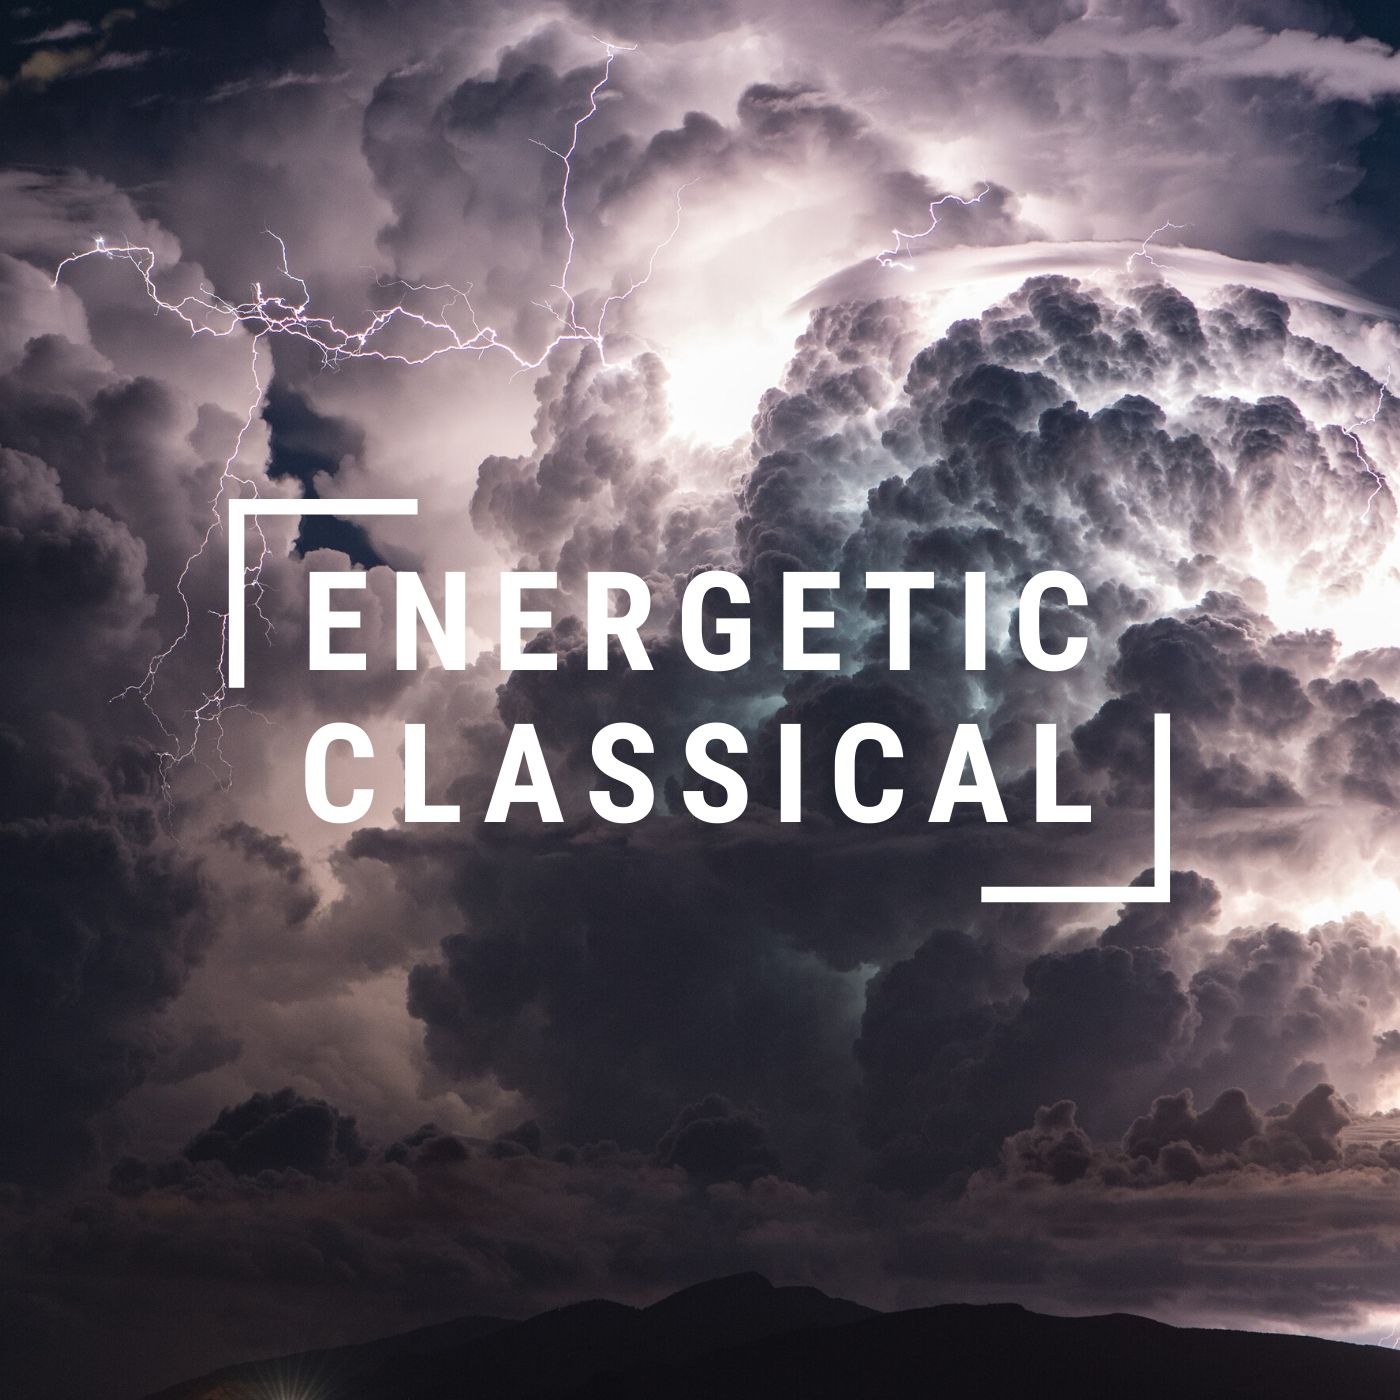 Fast, Energetic Classical Music 